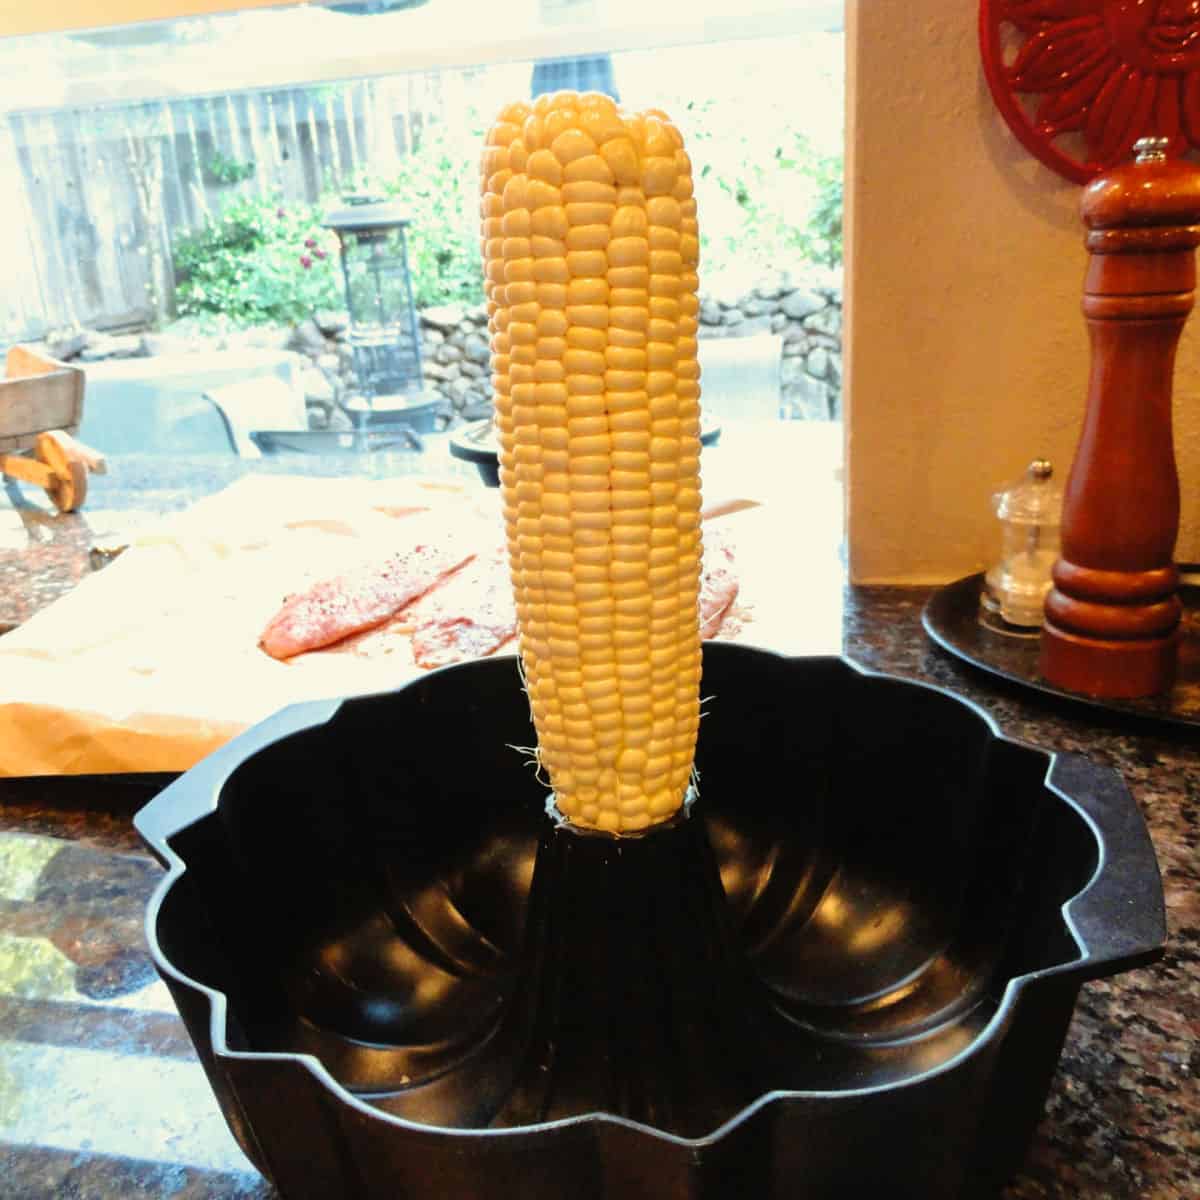 An ear of corn in a bundt pan ready to be cut off for the corn zucchini saute.